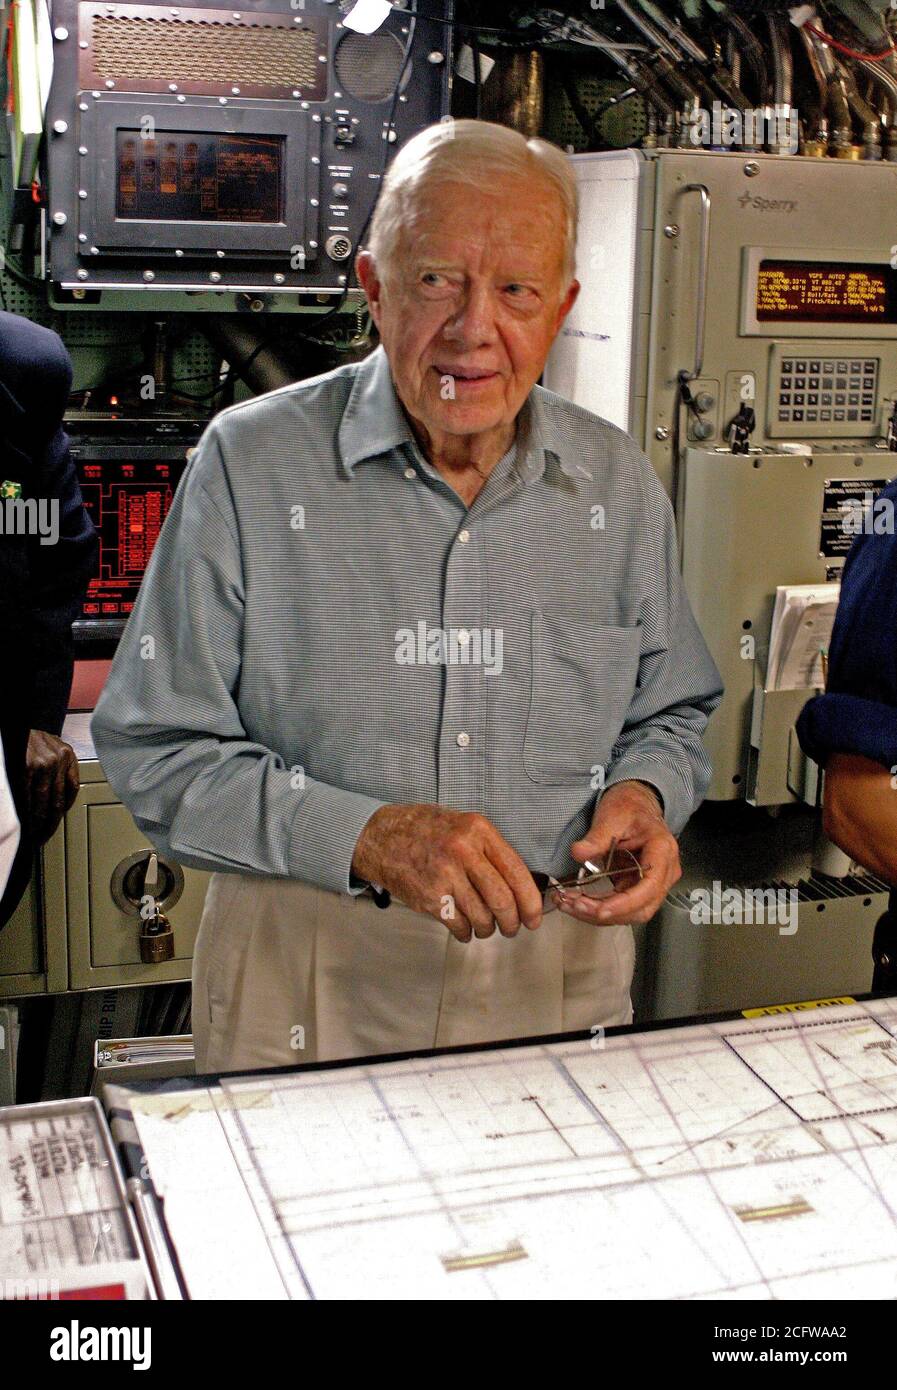 2005 - Former US President Jimmy Carter (D) looks over the navigation table in the control room of his namesake ship, the Sea Wolf Class Attack Submarine USS JIMMY CARTER (SSN 23). President Carter and his wife, Rosalynn, spent the night aboard the submarine, touring the ship and meeting with crew members. The USS JIMMY CARTER is the third Sea Wolf Class Attack Submarine. Stock Photo